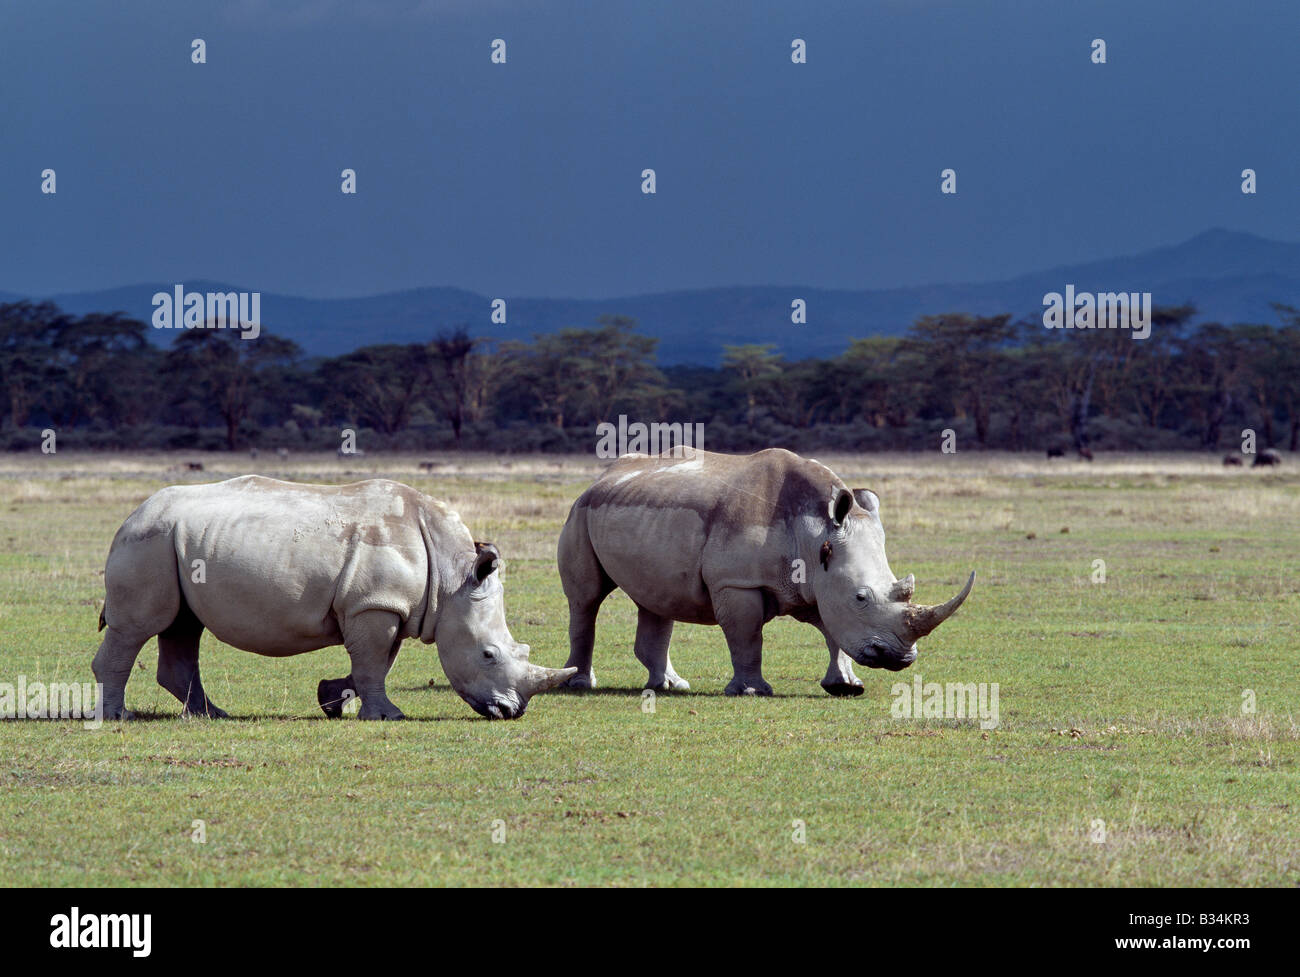 Kenya, Rift Valley Province, Nakuru National Park. Two white rhinos graze in the Lake Nakuru National Park under a threatening sky. A red-billed oxpecker clings to the neck of one of the rhinos.White rhinos are almost double the weight of black rhinos and are more docile. They are grazers rather than browsers so they do not compete for food with black rhinos. Stock Photo